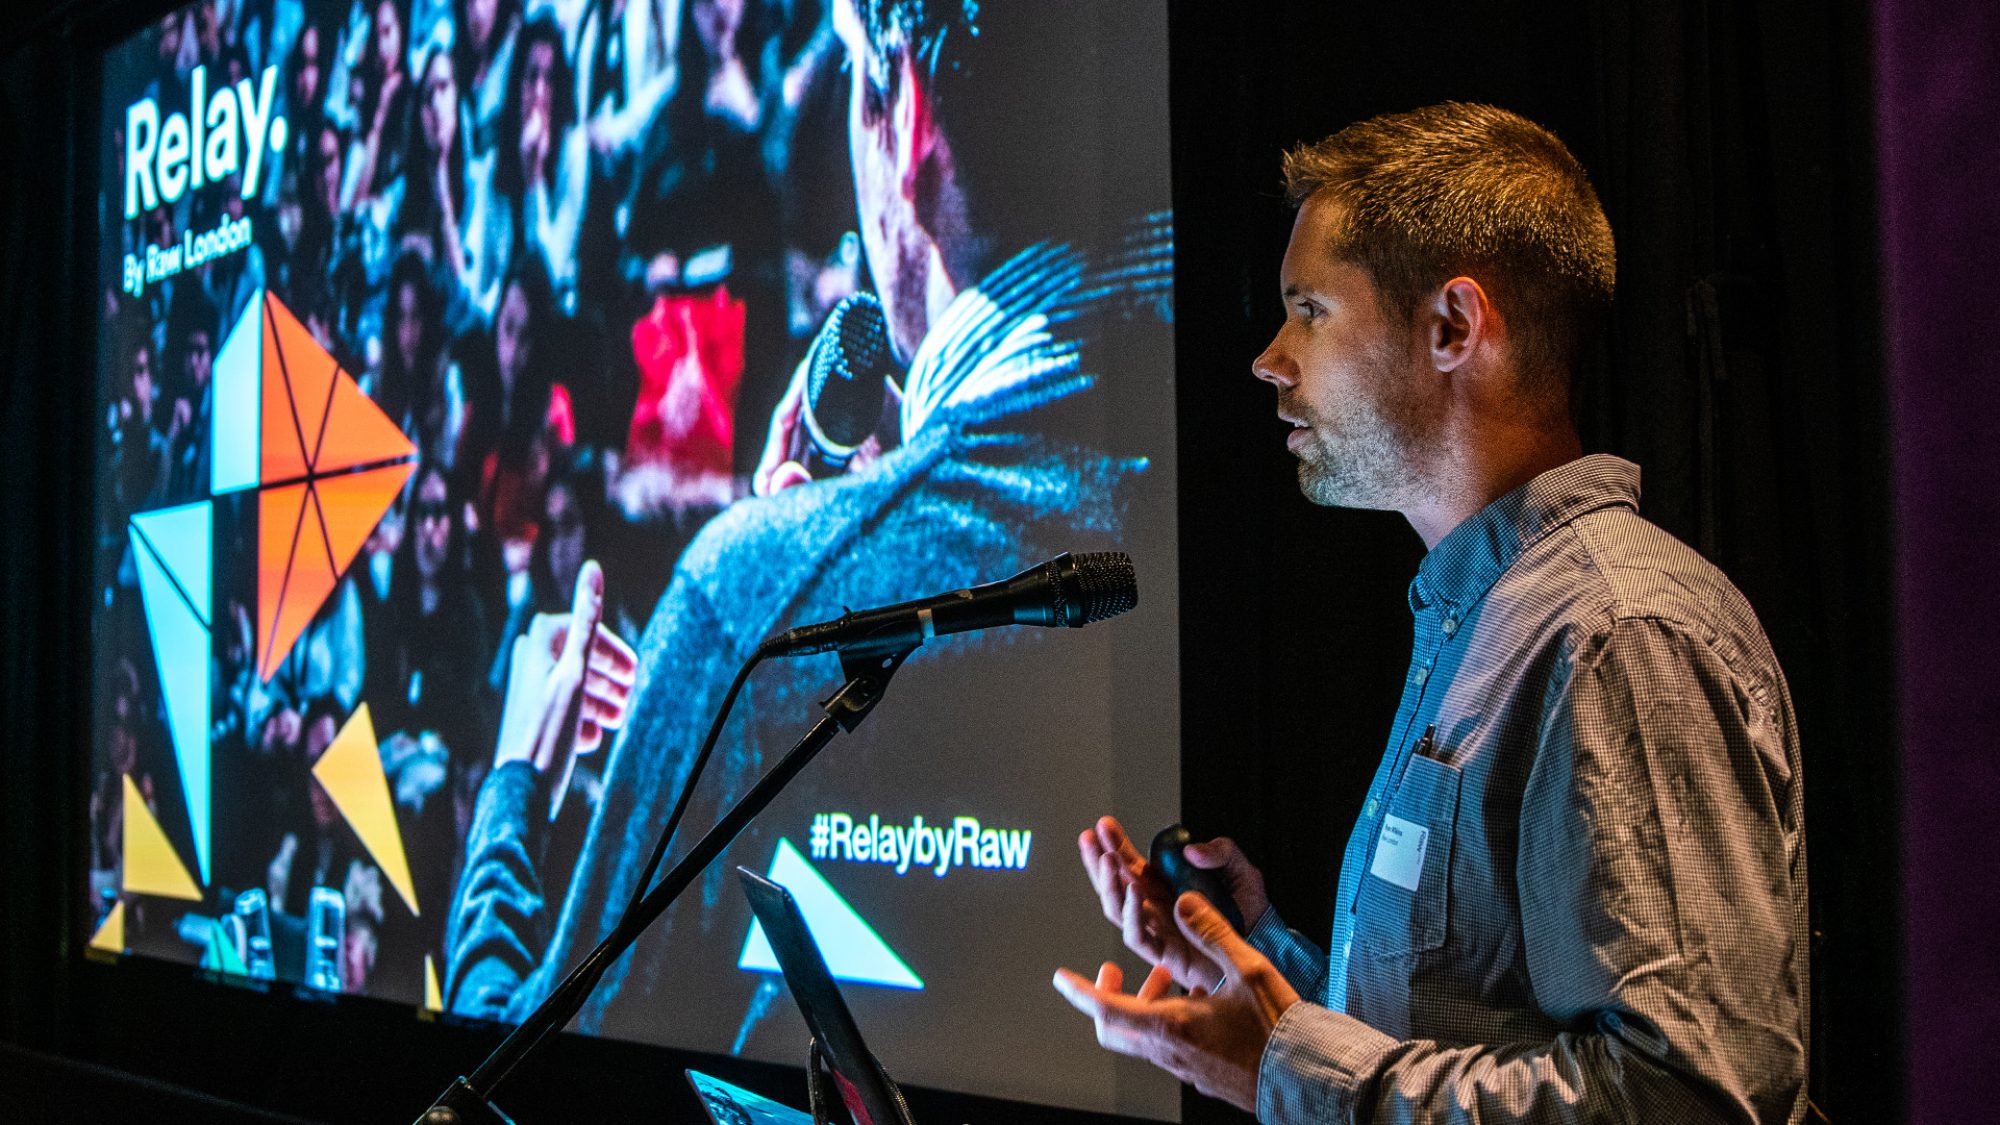 Ryan Wilkins, CEO of Raw London, hosts our Relay event in September 2019